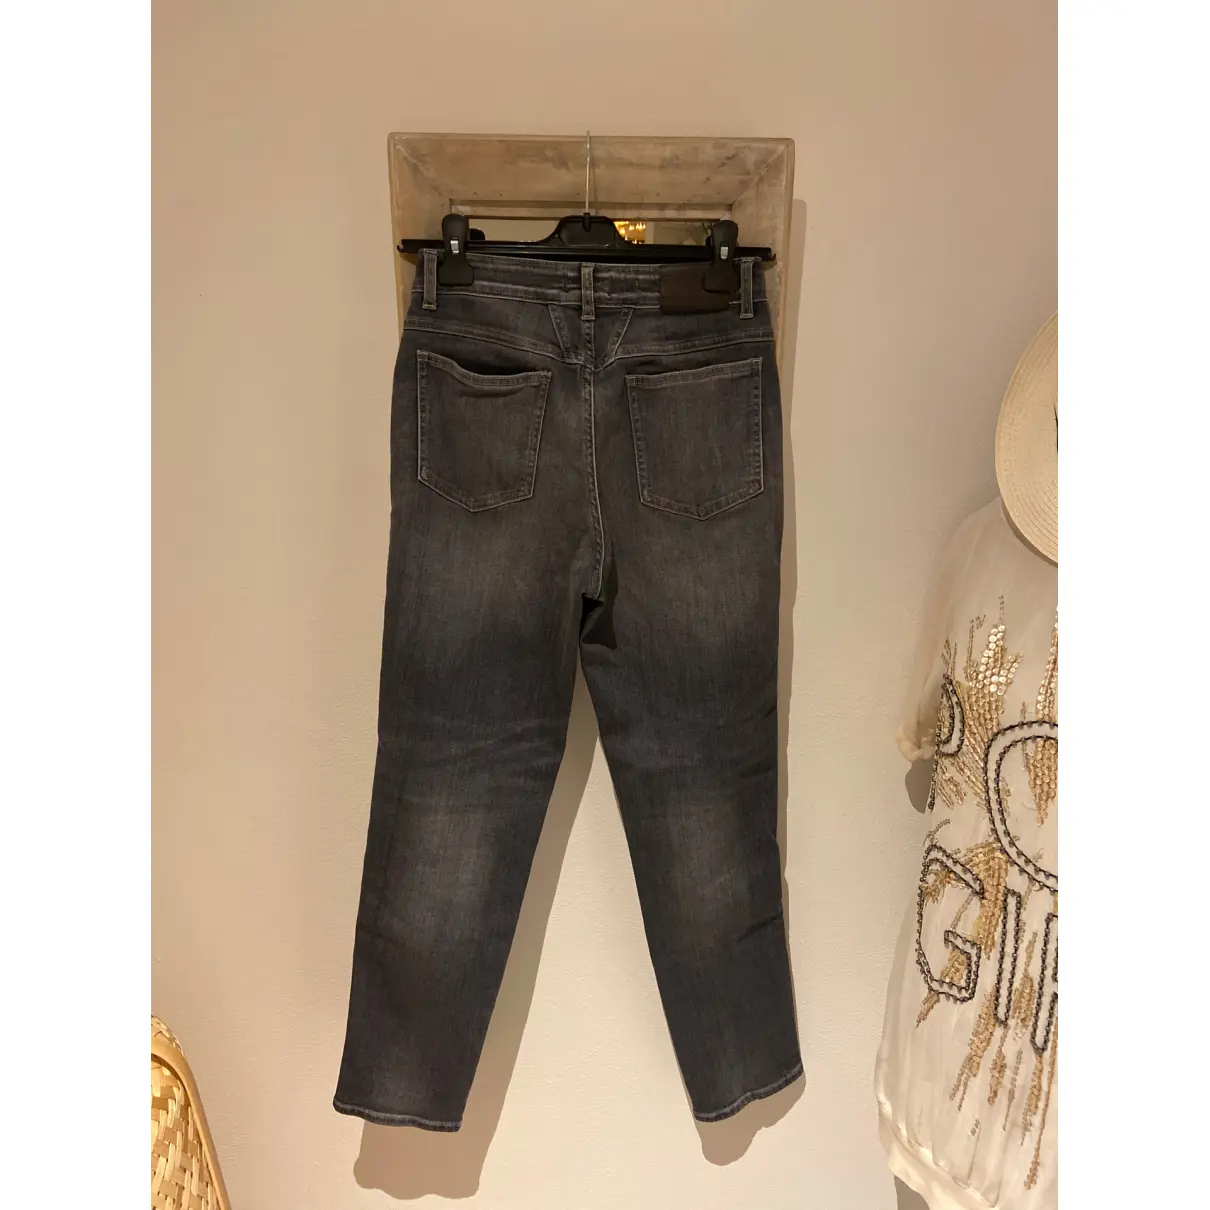 Buy Closed Jeans online